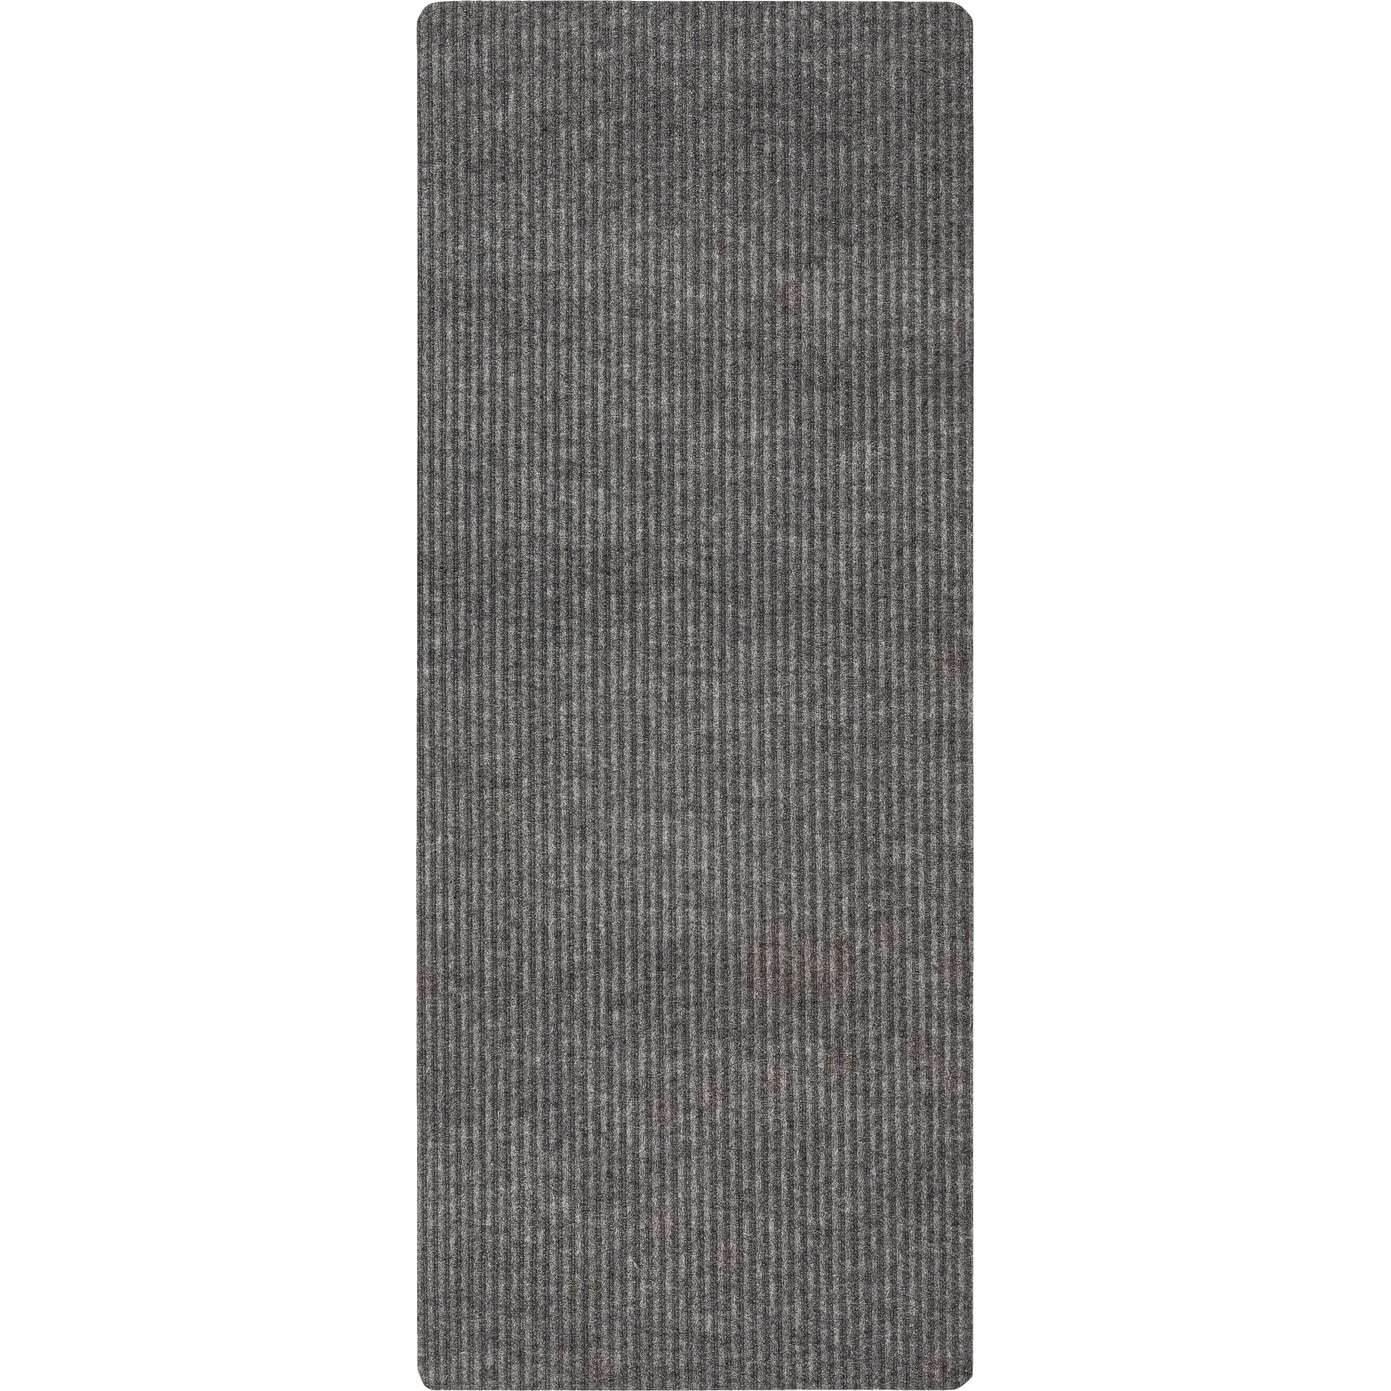 Mohawk Home Utility Floor Mat Solid Charcoal Grey (3' x 4') Perfect for  Garage, Entryway, Porch, and Laundry Room